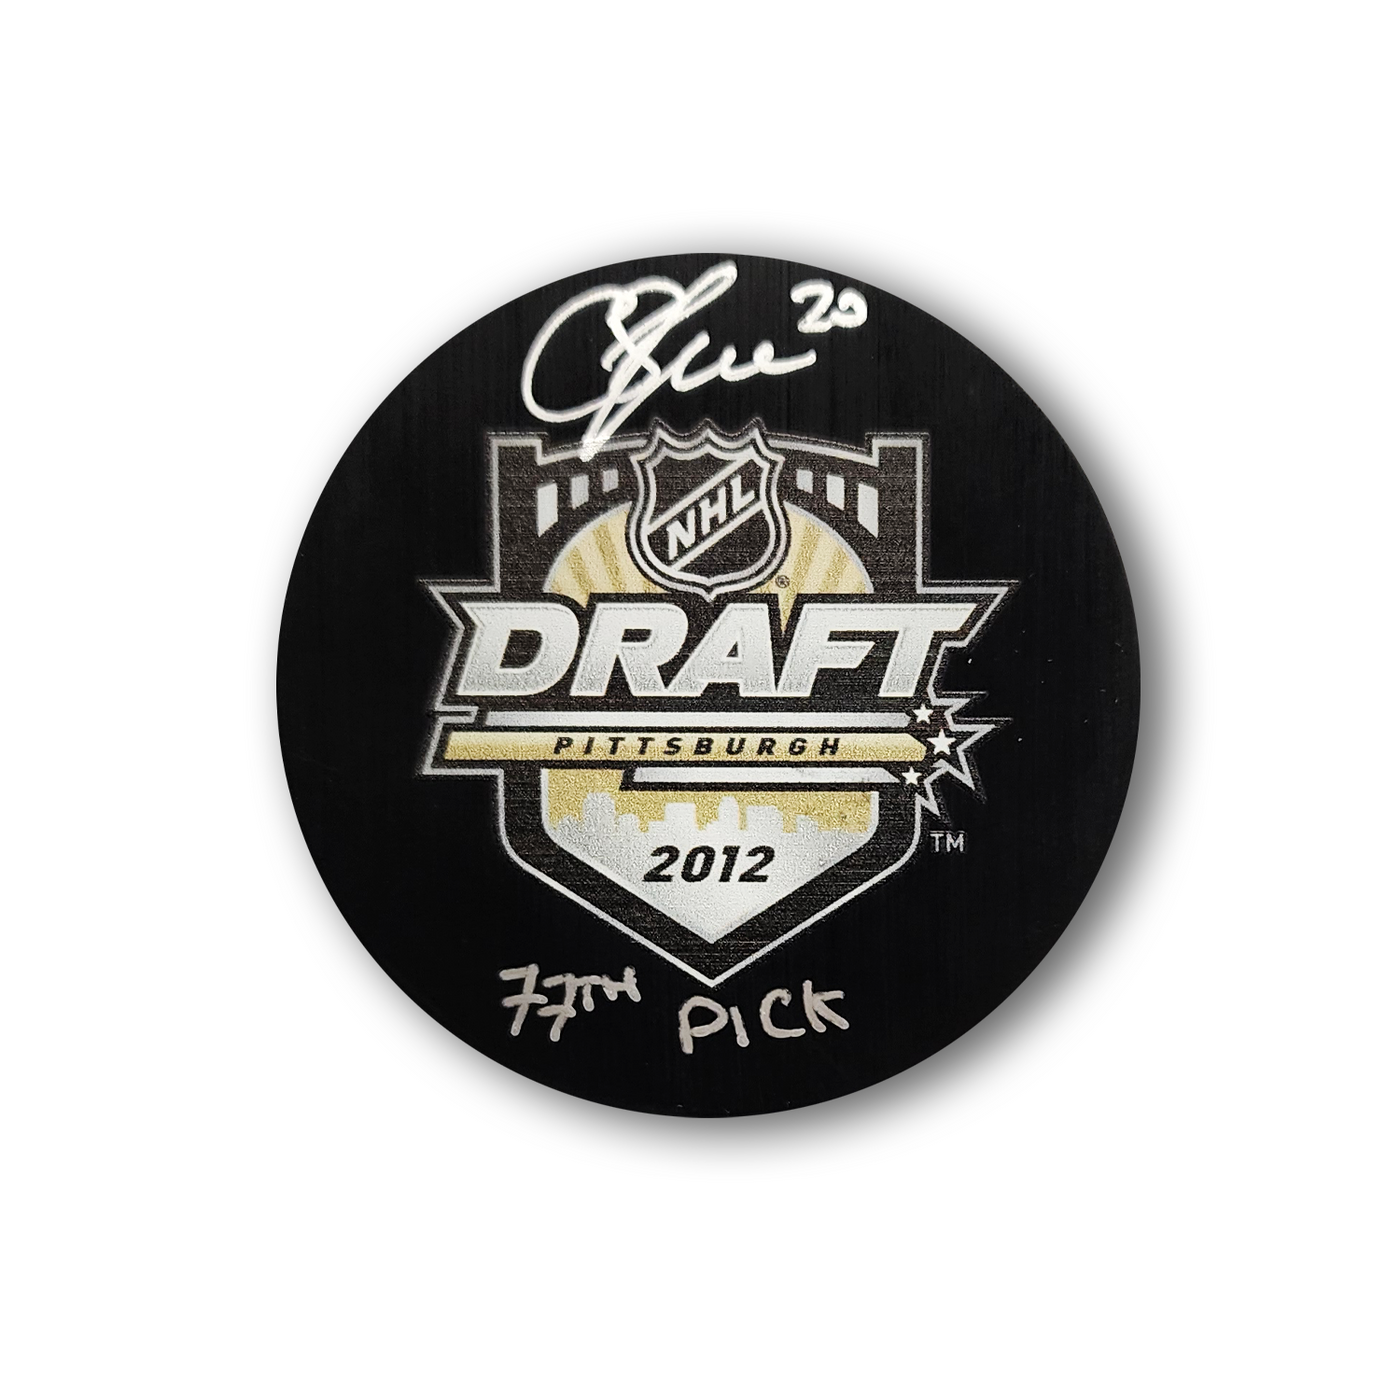 Chandler Stephenson Autographed 2012 NHL Draft Hockey Puck Inscribed 77th Pick